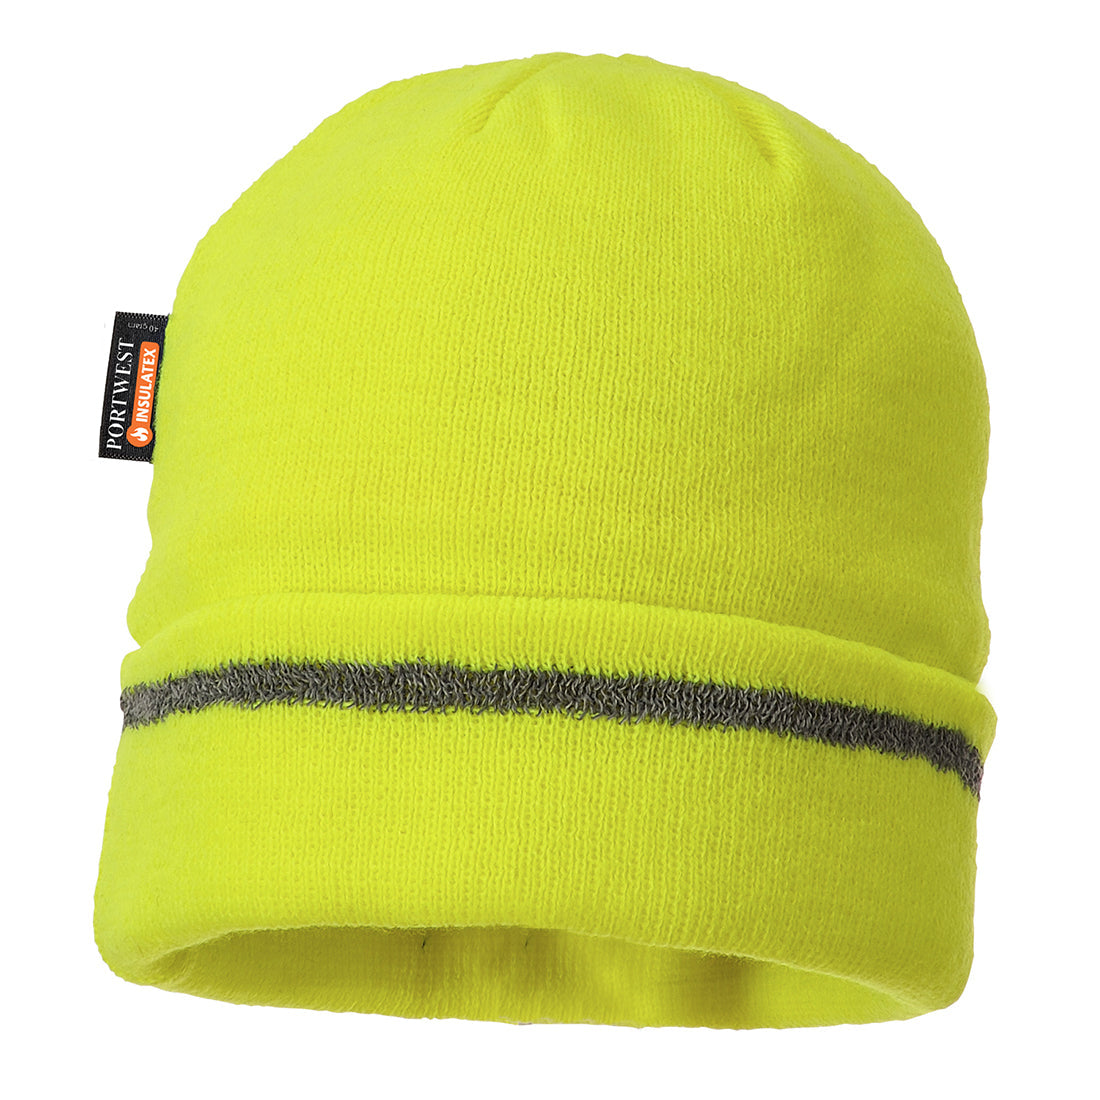 Portwest B023 Reflective Trim Knit Hat Insulatex Lined 1#colour_yellow